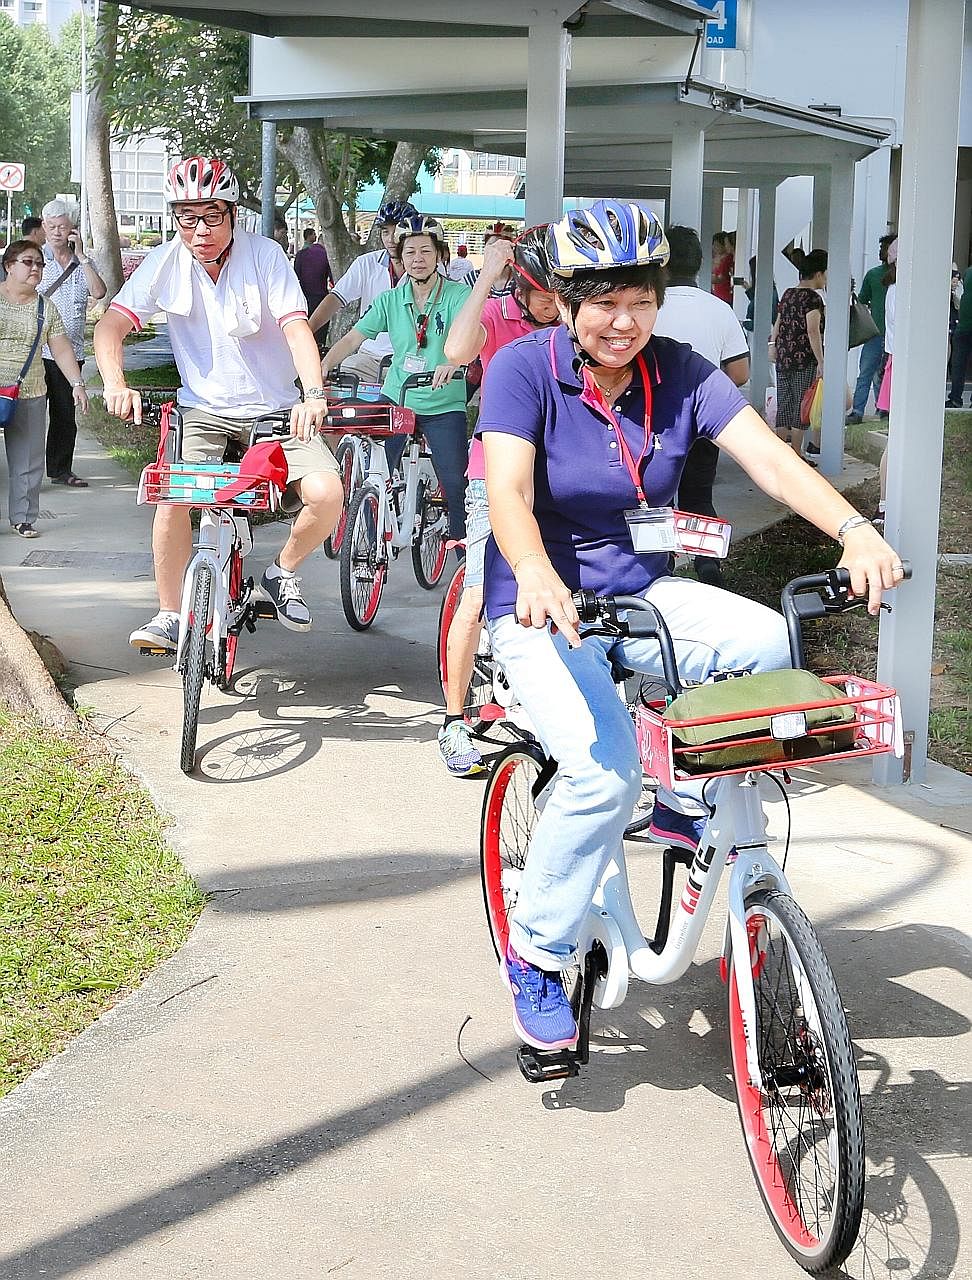 The lock of the SG Bike bicycles can be unlocked with the phones of registered users, a special card mailed to them, or even their ez-link card.